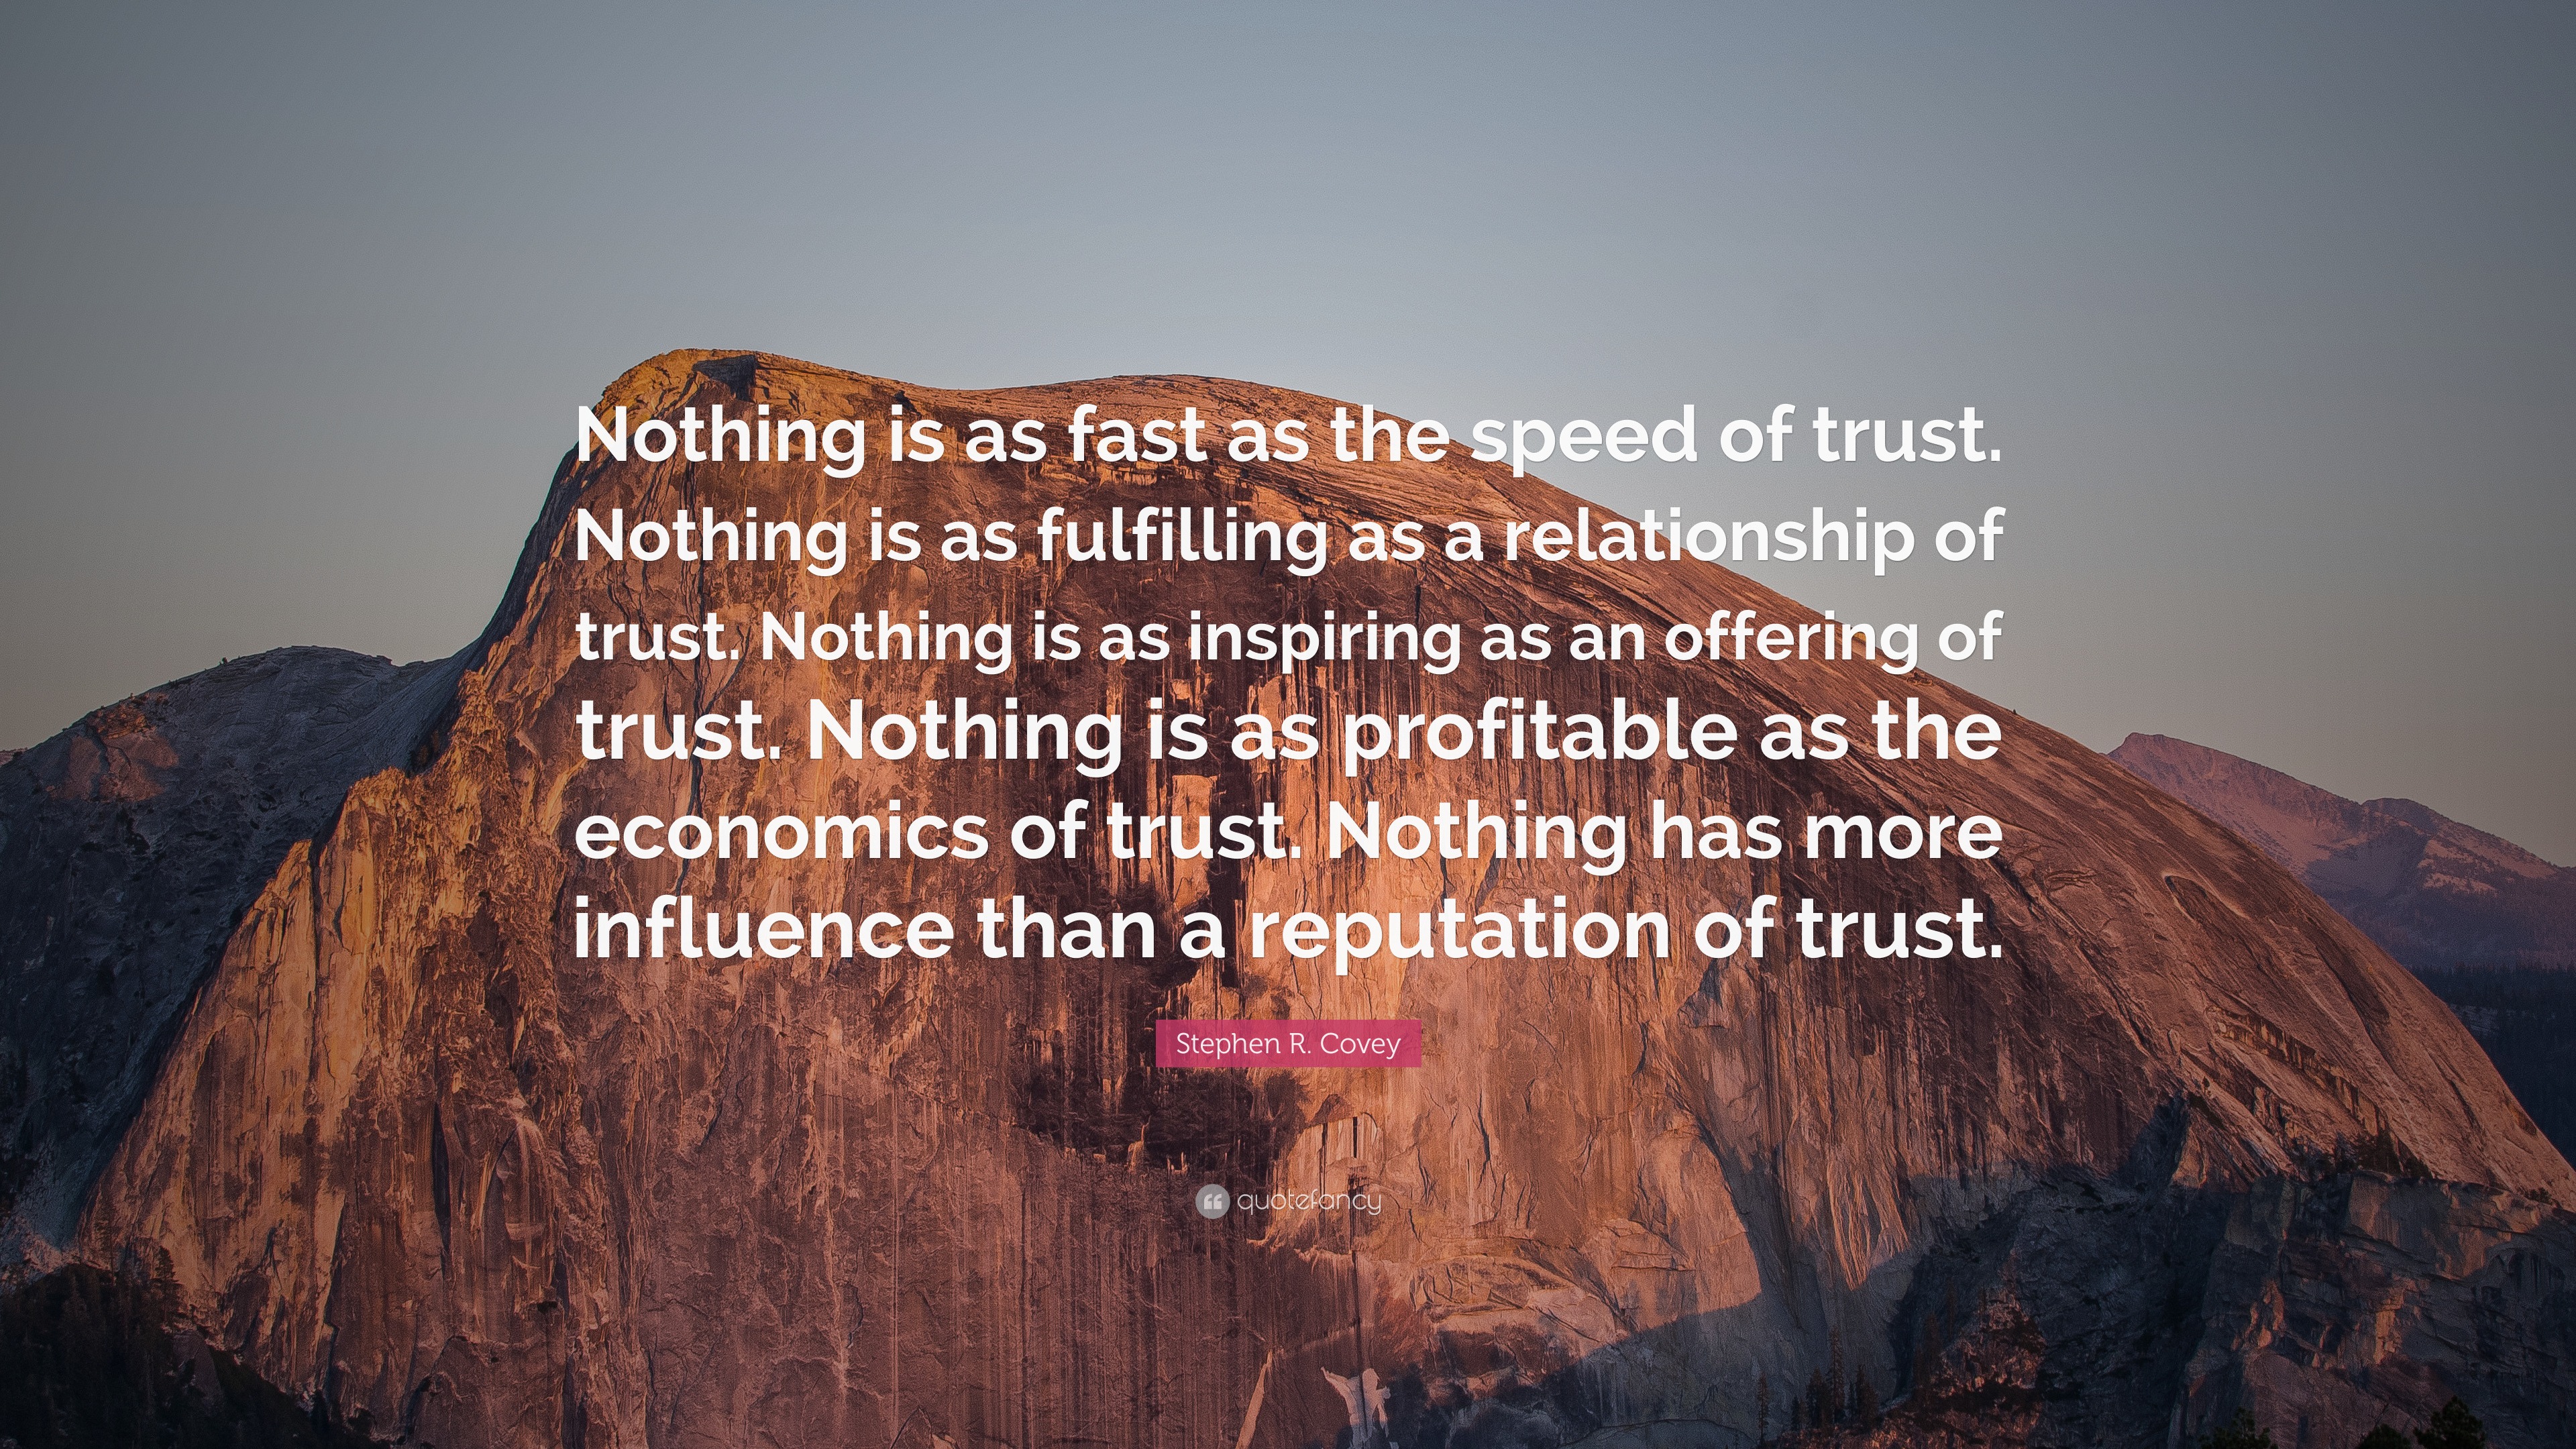 Stephen R. Covey Quote: “Nothing is as fast as the speed of trust